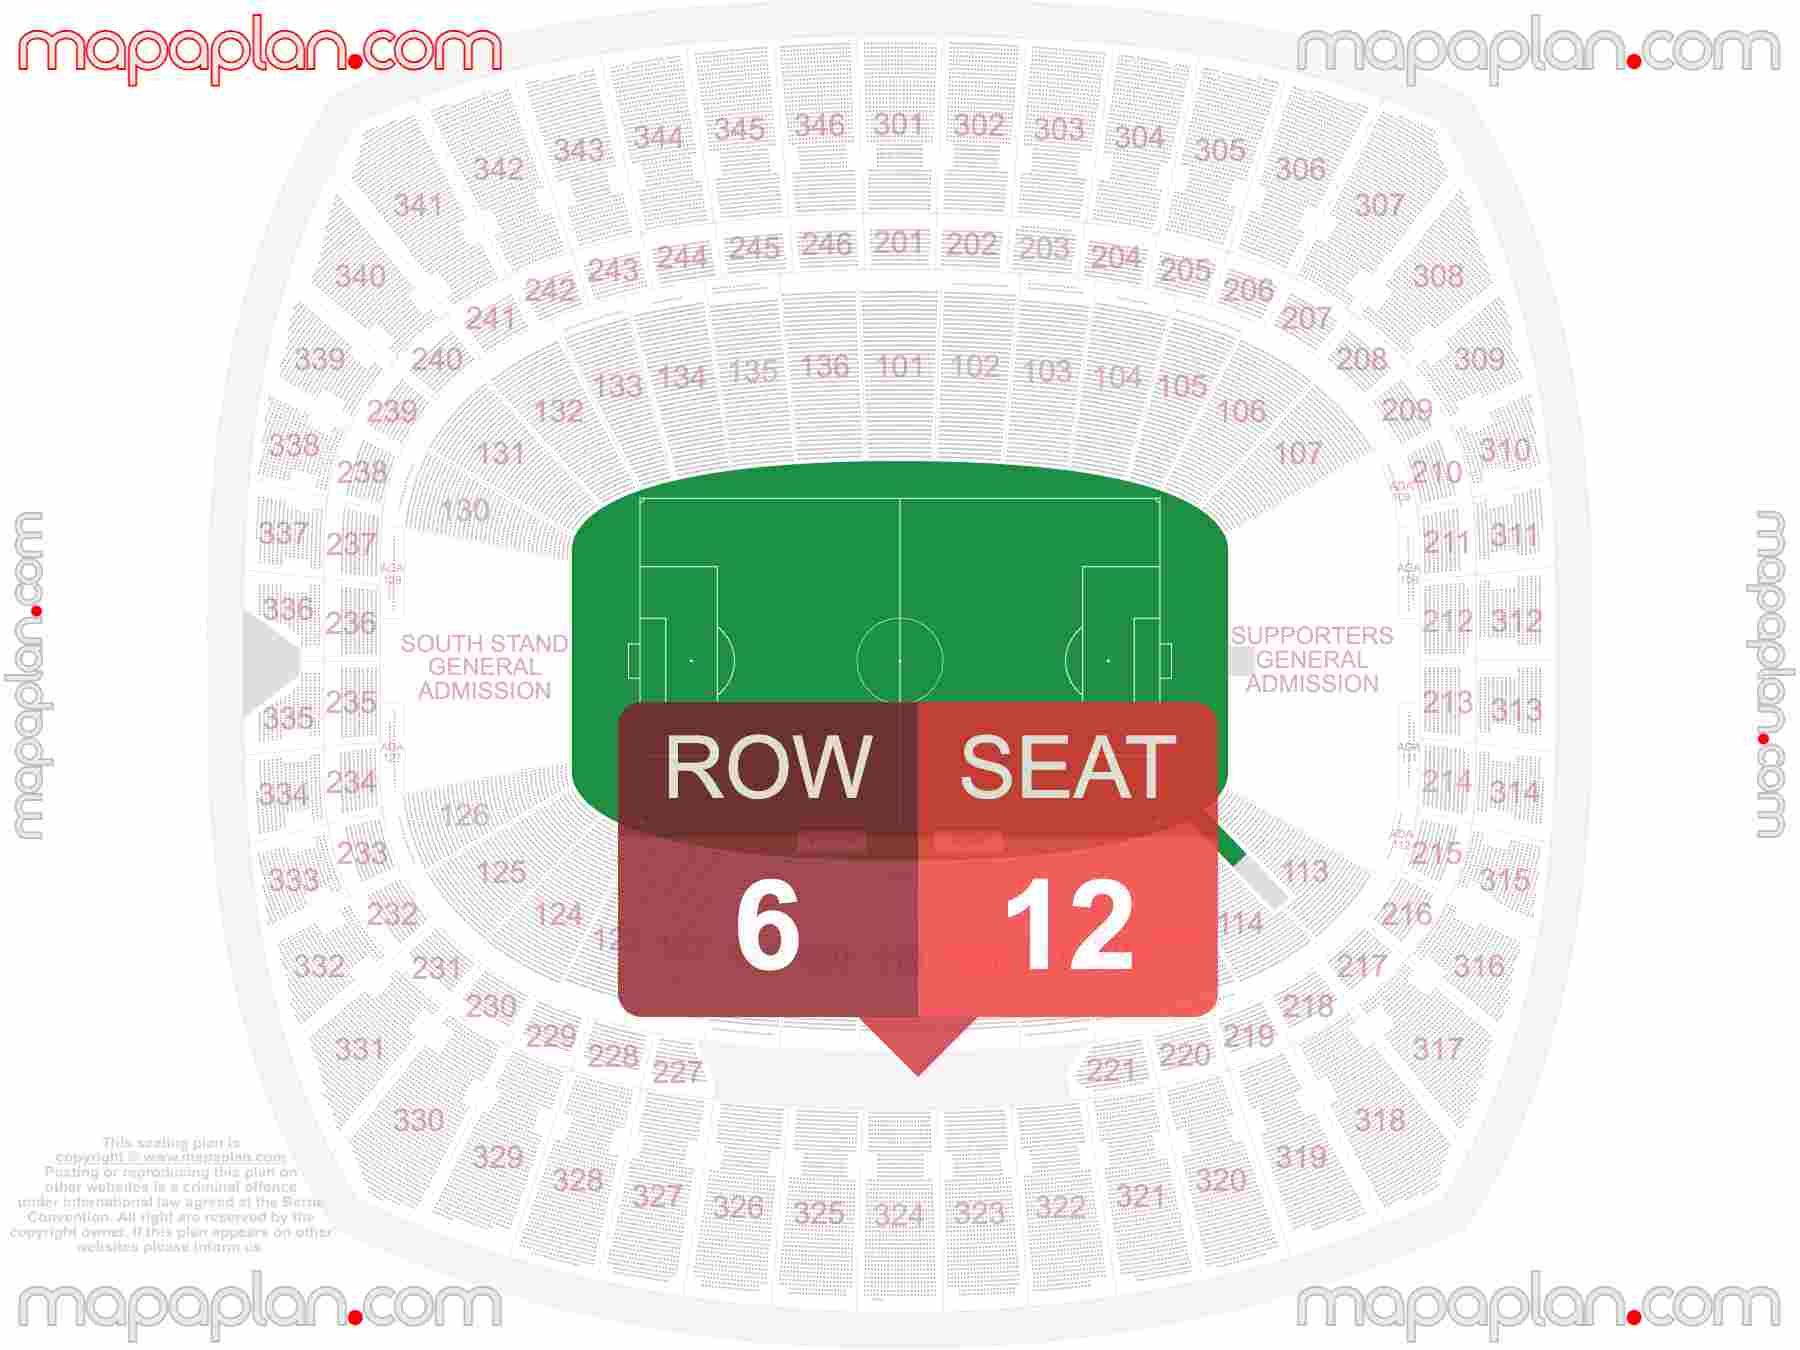 Kansas City GEHA Field Arrowhead Stadium seating chart Soccer & Chiefs football find best seats row numbering system plan showing how many seats per row - Individual 'find my seat' virtual locator